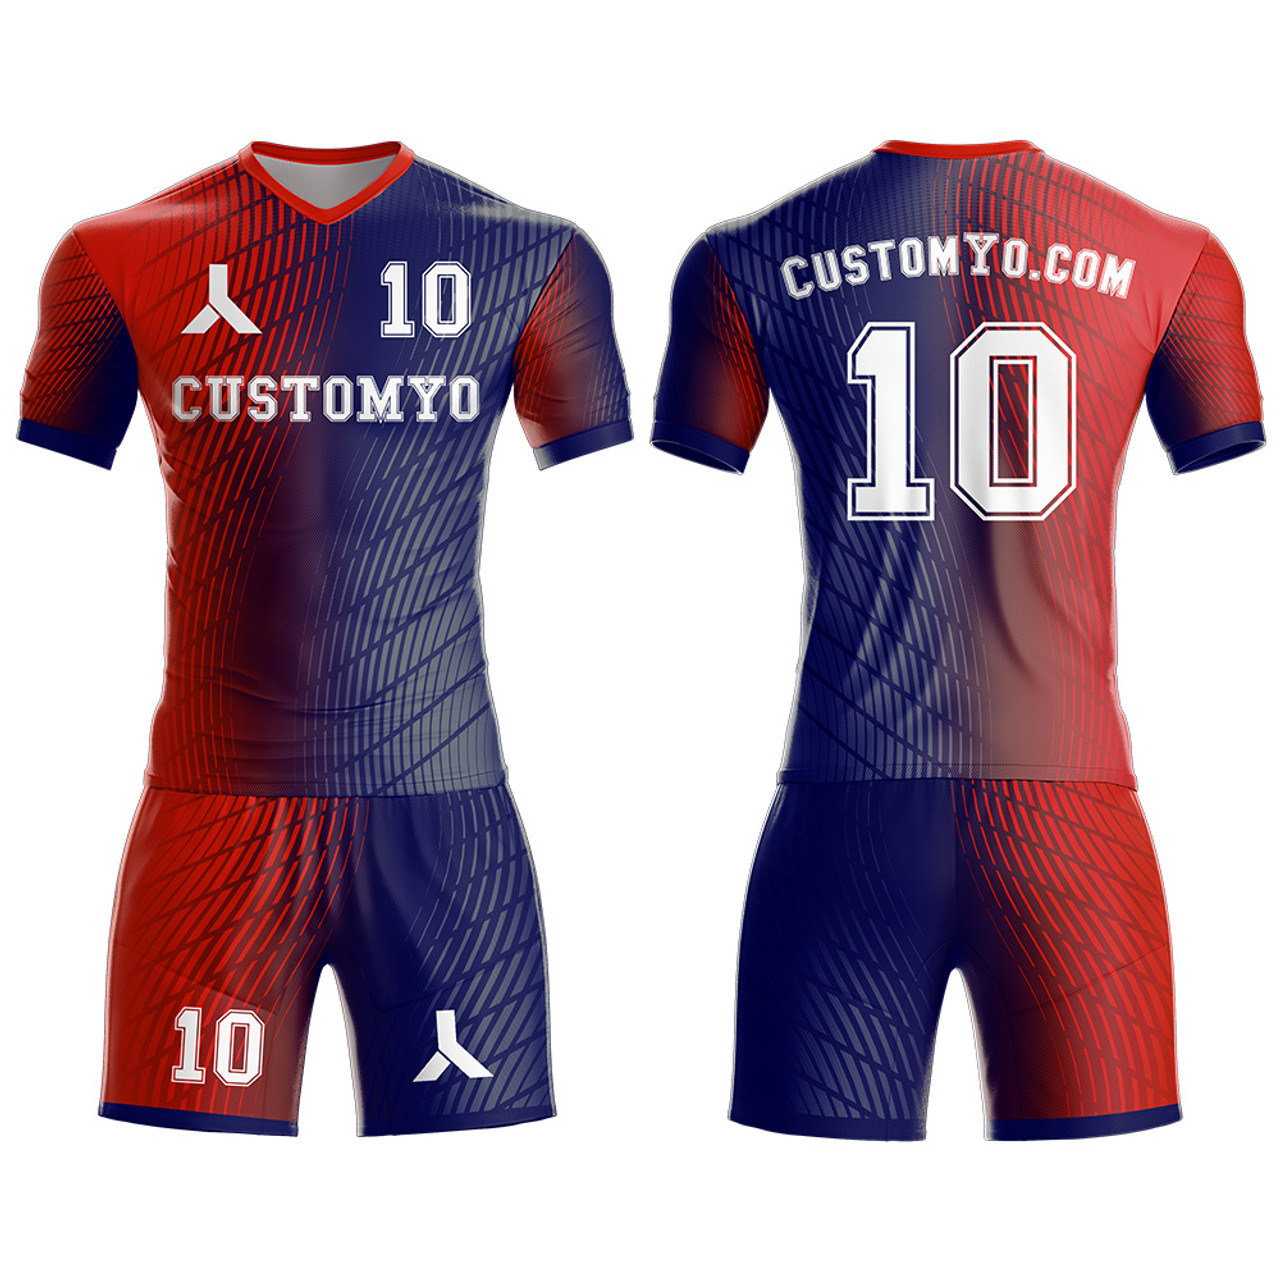 Absorbent Chemist Popular Custom Team Sportswear 2021 NEW DESIGN Soccer Jerseys Create your own  uniform with Team Names, Numbers